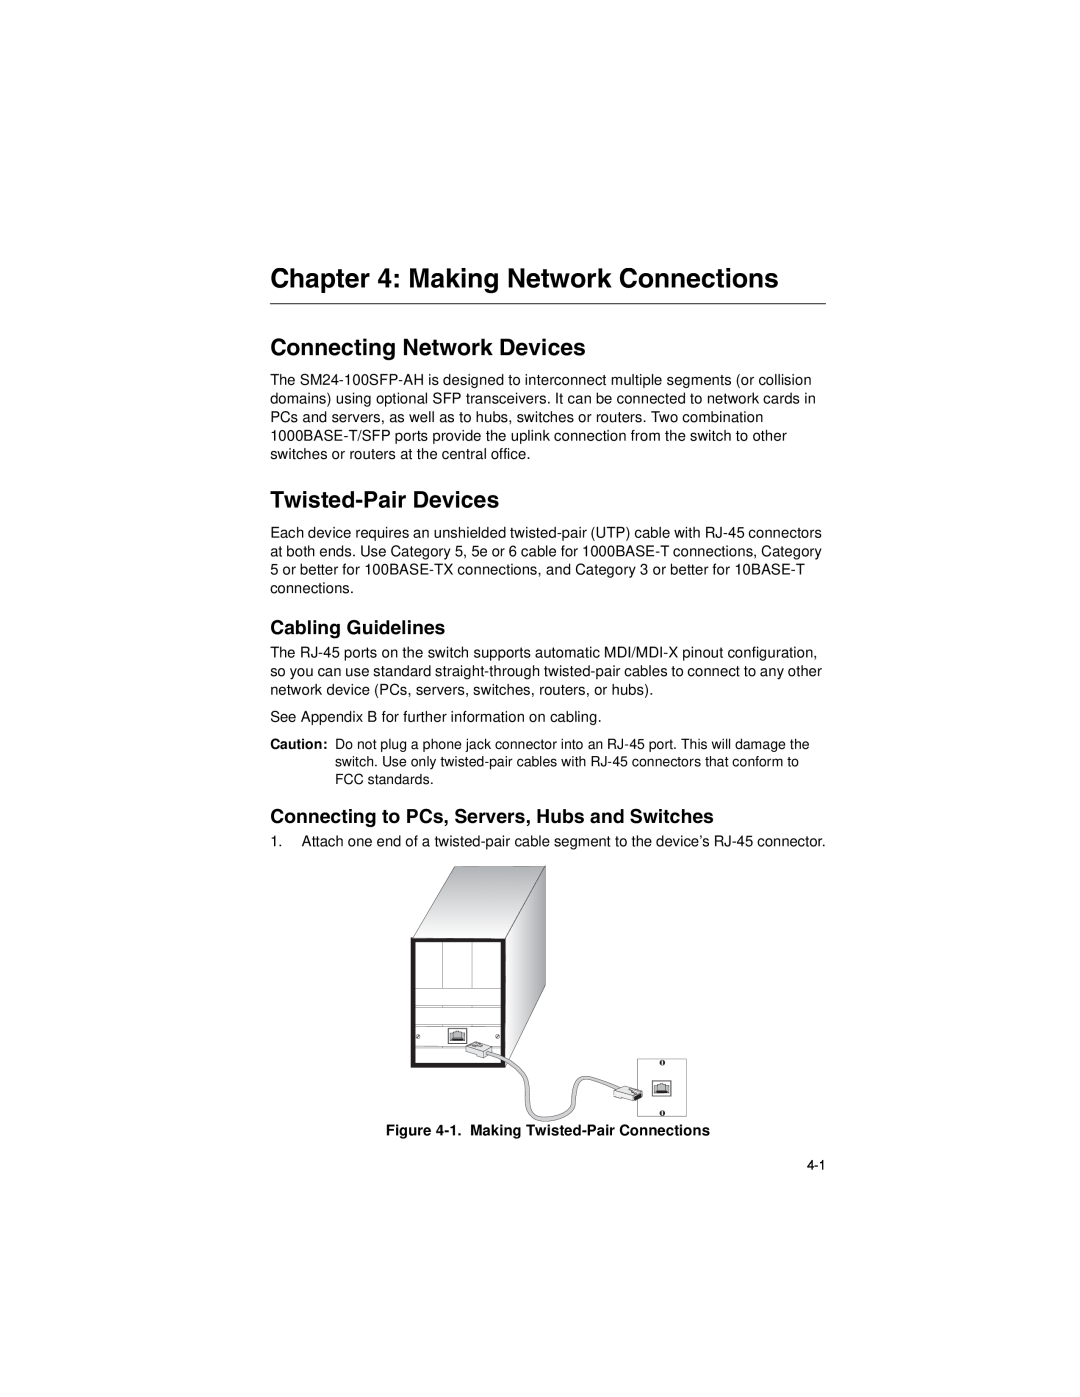 Transition Networks SM24-100SFP-AH manual Making Network Connections, Connecting Network Devices, Twisted-Pair Devices 